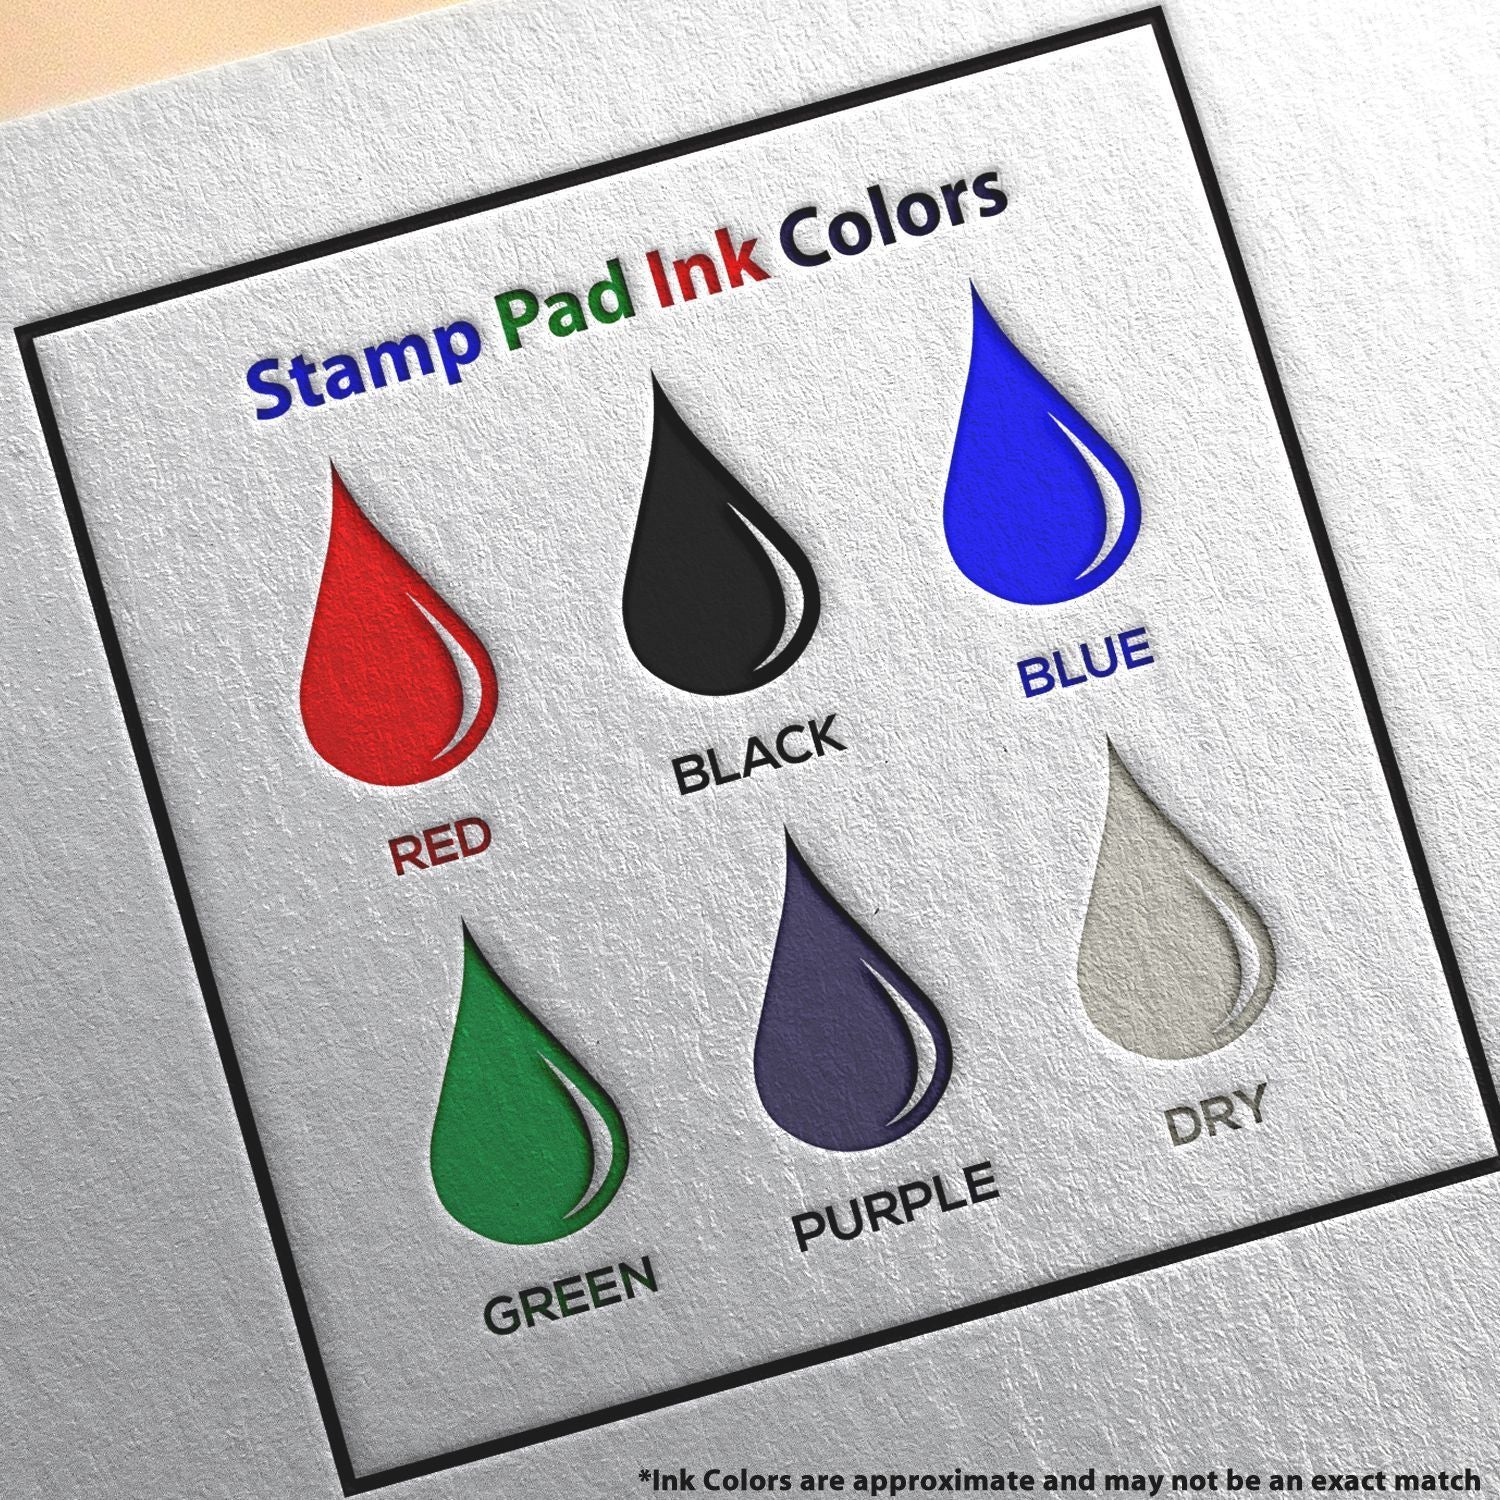 One Color Replacement Ink Pad For Hm 6105 And Hm 6105 Dry Alt 2